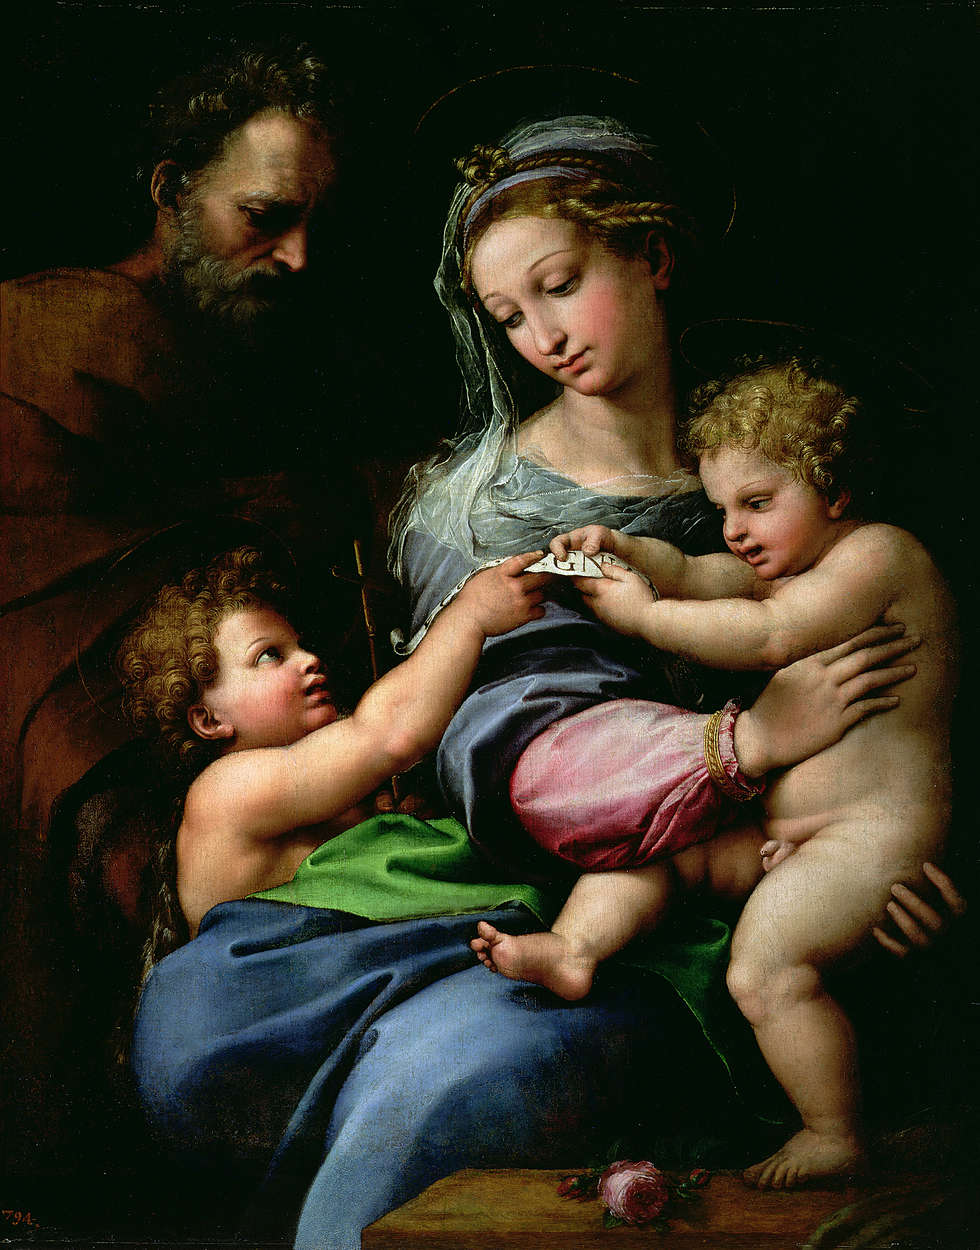             Photo wallpaper "Madonna with the Roseum" by Raphael
        